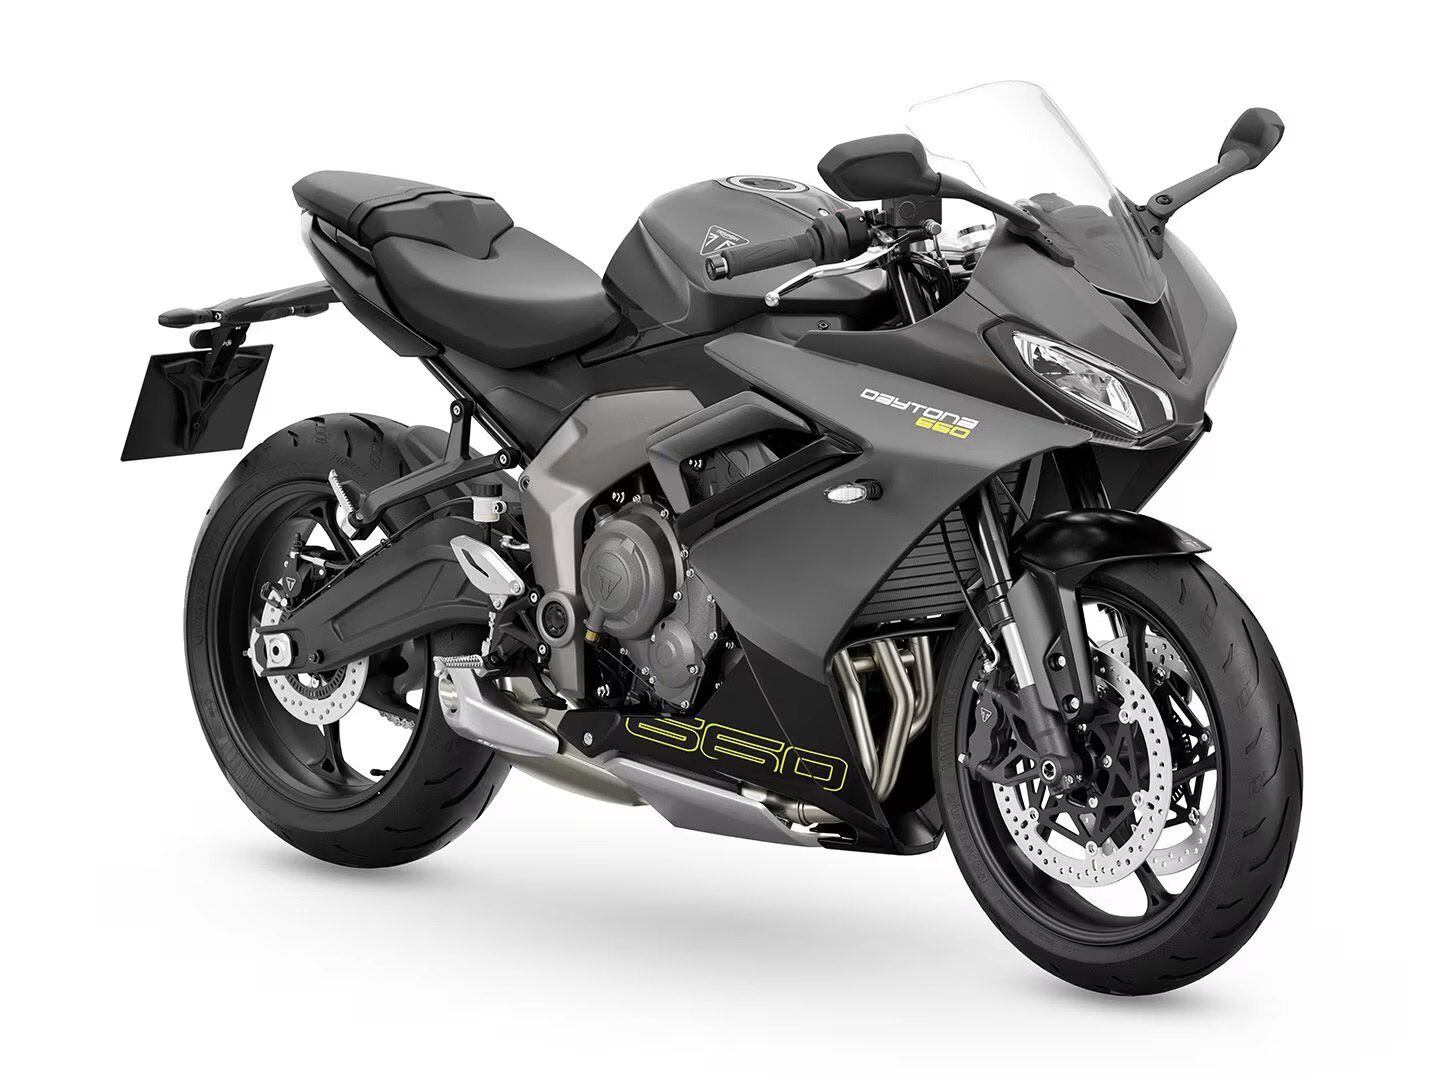 The new 2025 Daytona 660 offers an appealing mix of performance, price, and character. It's one of the few triple-cylinder bikes in a sea of twins.